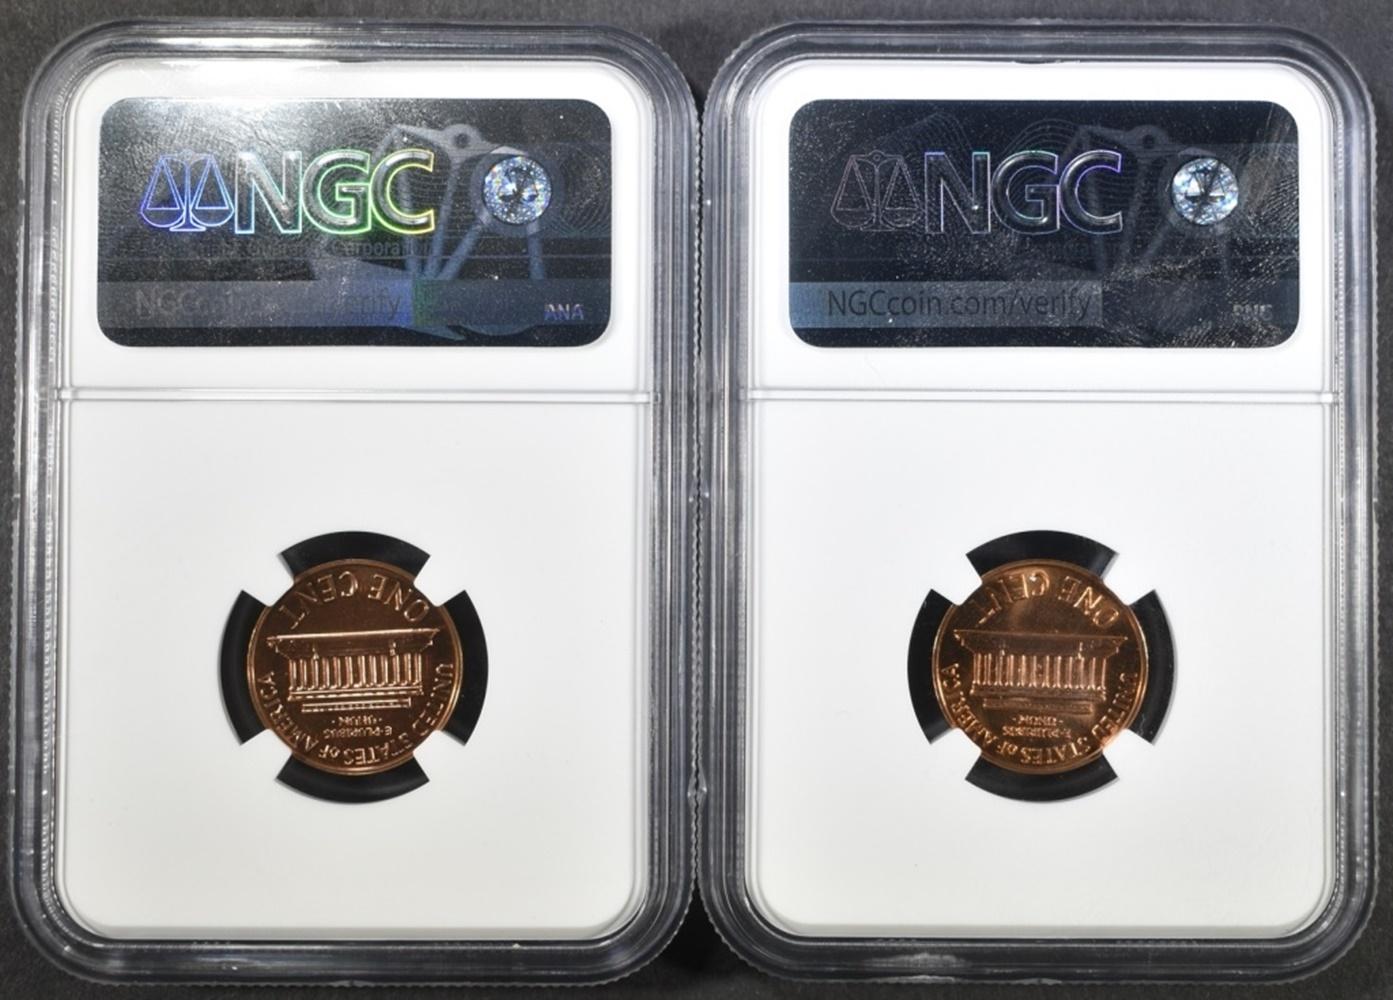 (2) 1962 LINCOLN CENTS NGC PF 67 RD